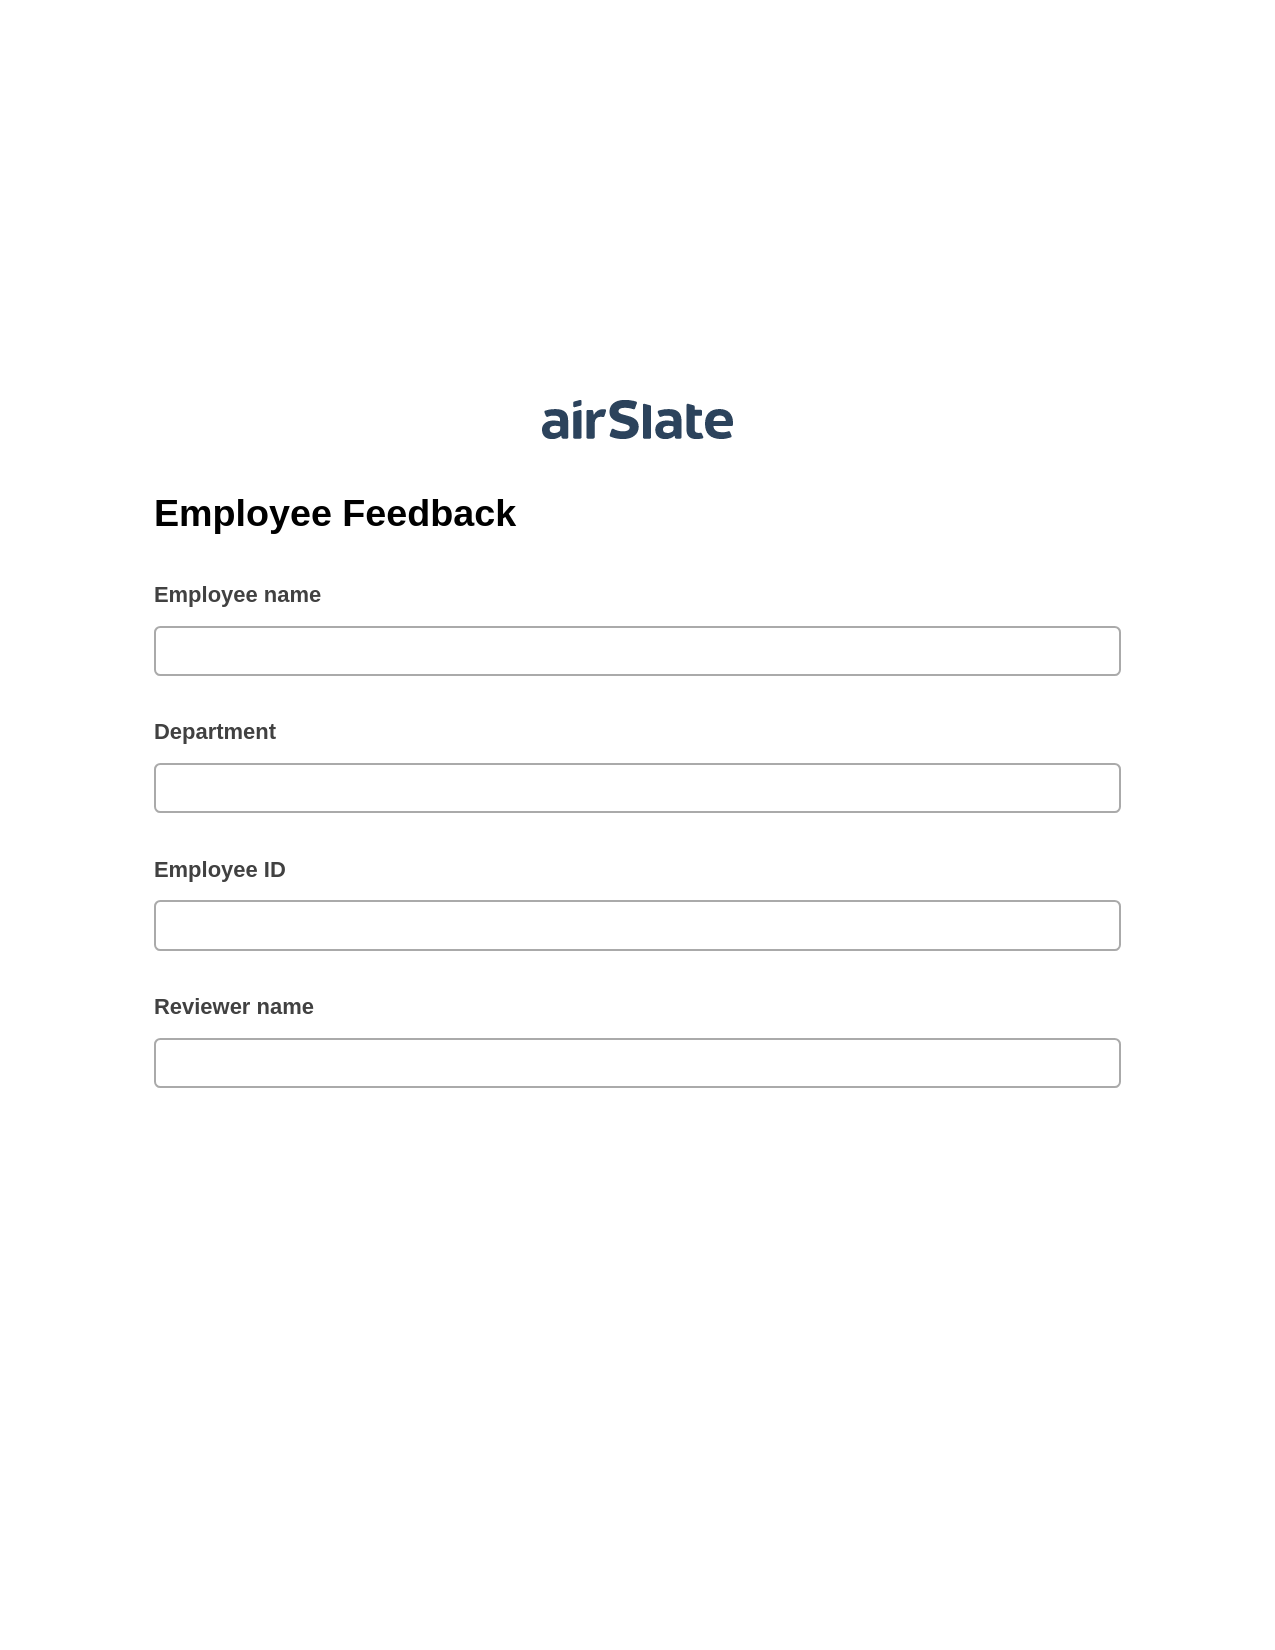 Employee Feedback Pre-fill from Salesforce Records with SOQL Bot, Webhook Bot, Dropbox Bot